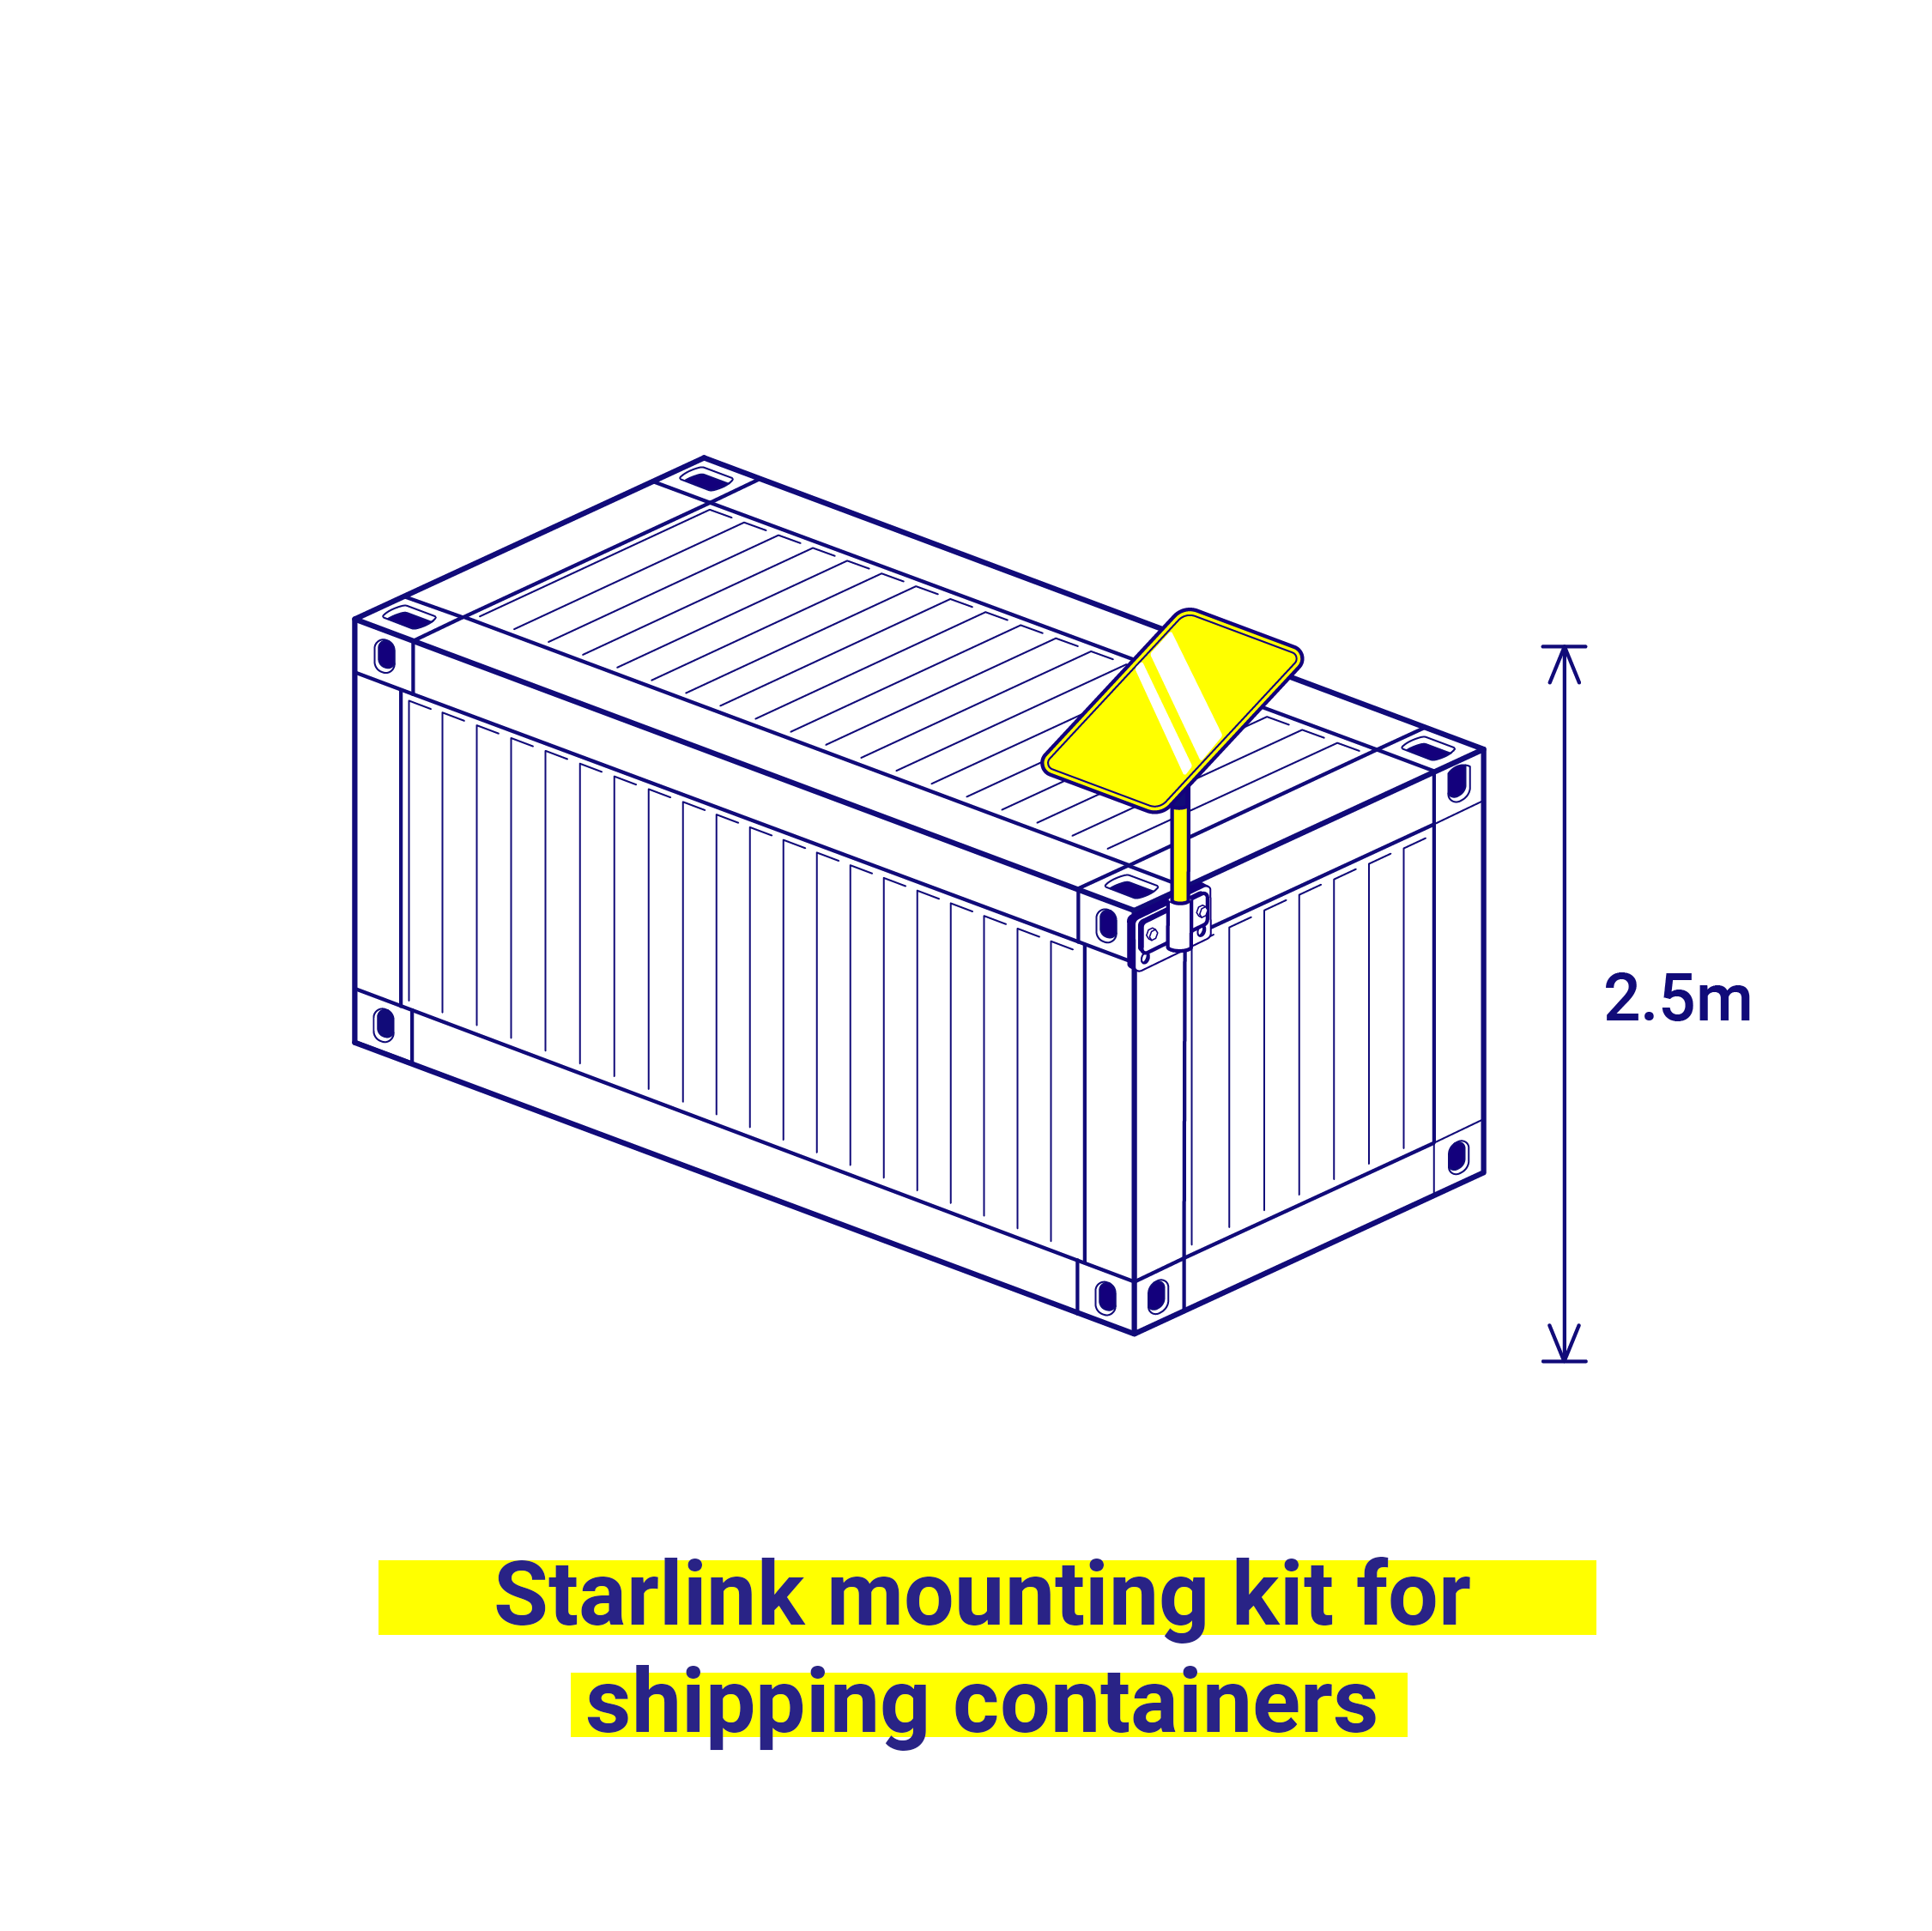 Shipping container starlink mounting kit for shipping containers up to 2.5m from the ground